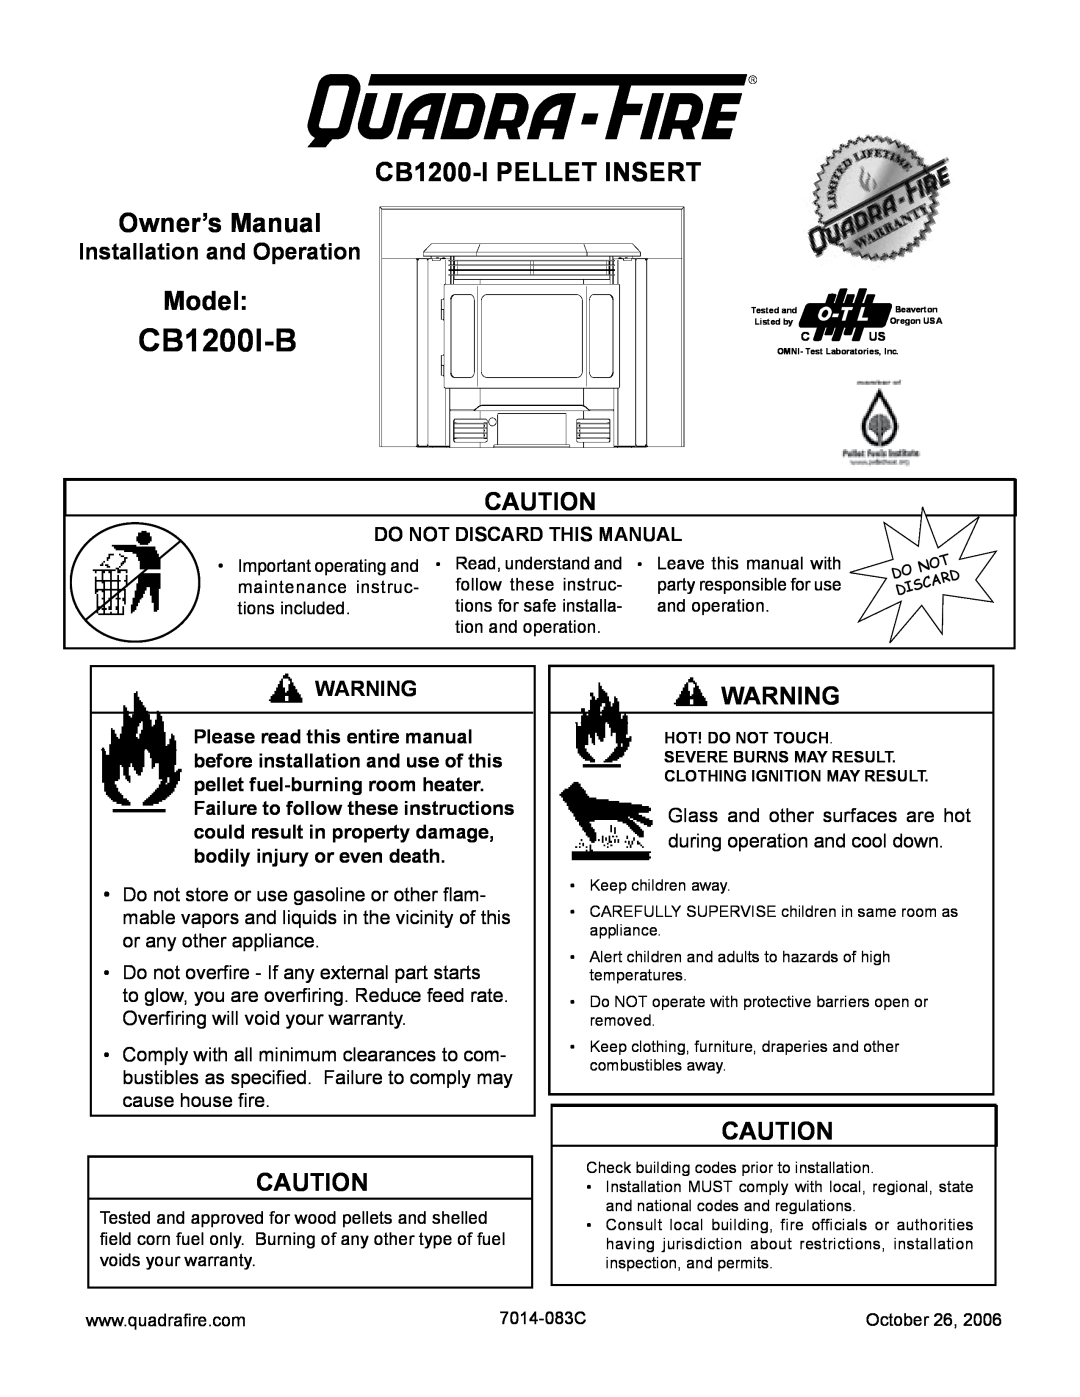 Quadra-Fire CB1200I-B owner manual Installation and Operation, Do Not Discard This Manual, CB1200-IPELLET INSERT, Model 